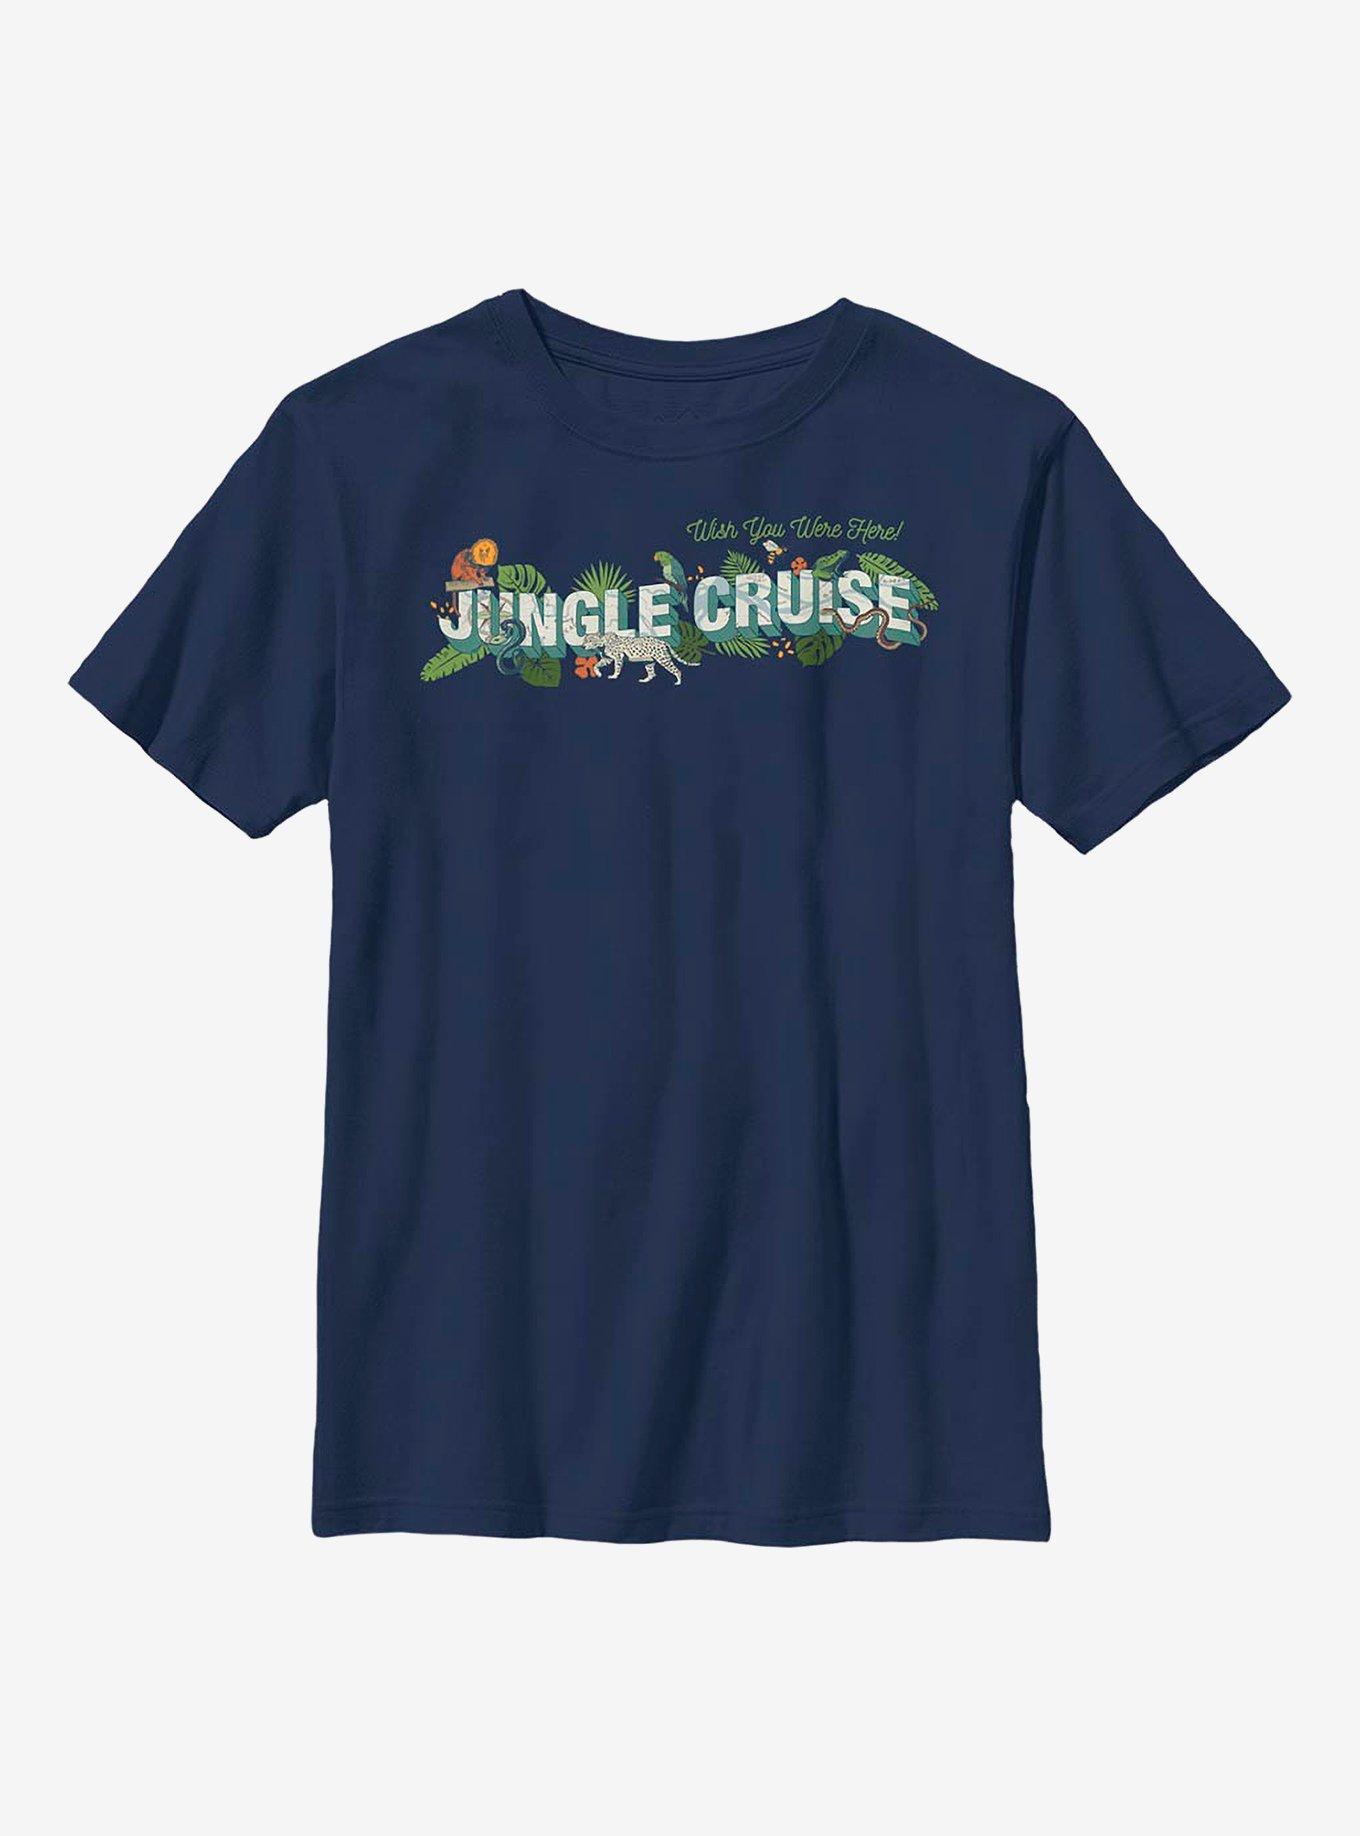 Disney Jungle Cruise Wish You Were Here! Postcard Youth T-Shirt, NAVY, hi-res